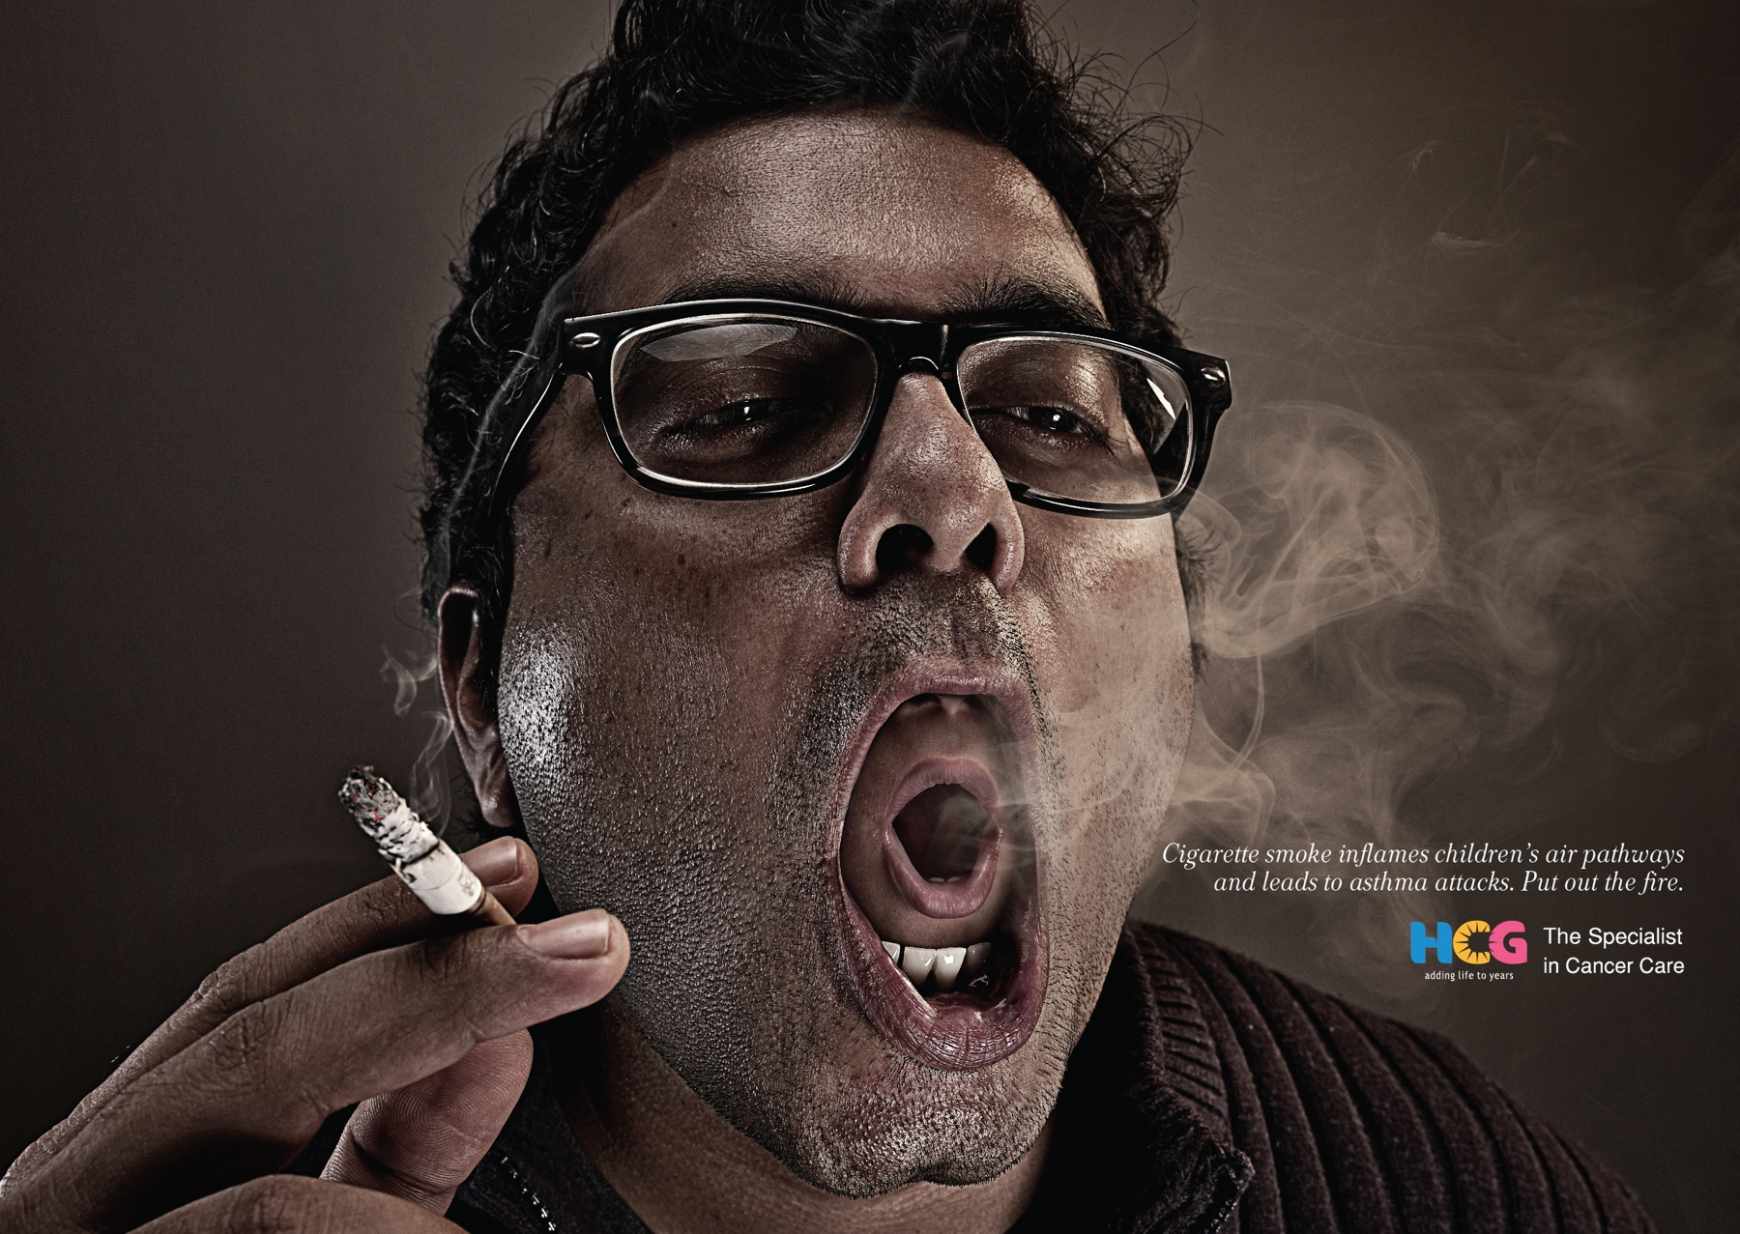 21 Clever Indian Print Ads With A Social Message That Redefine Creativity